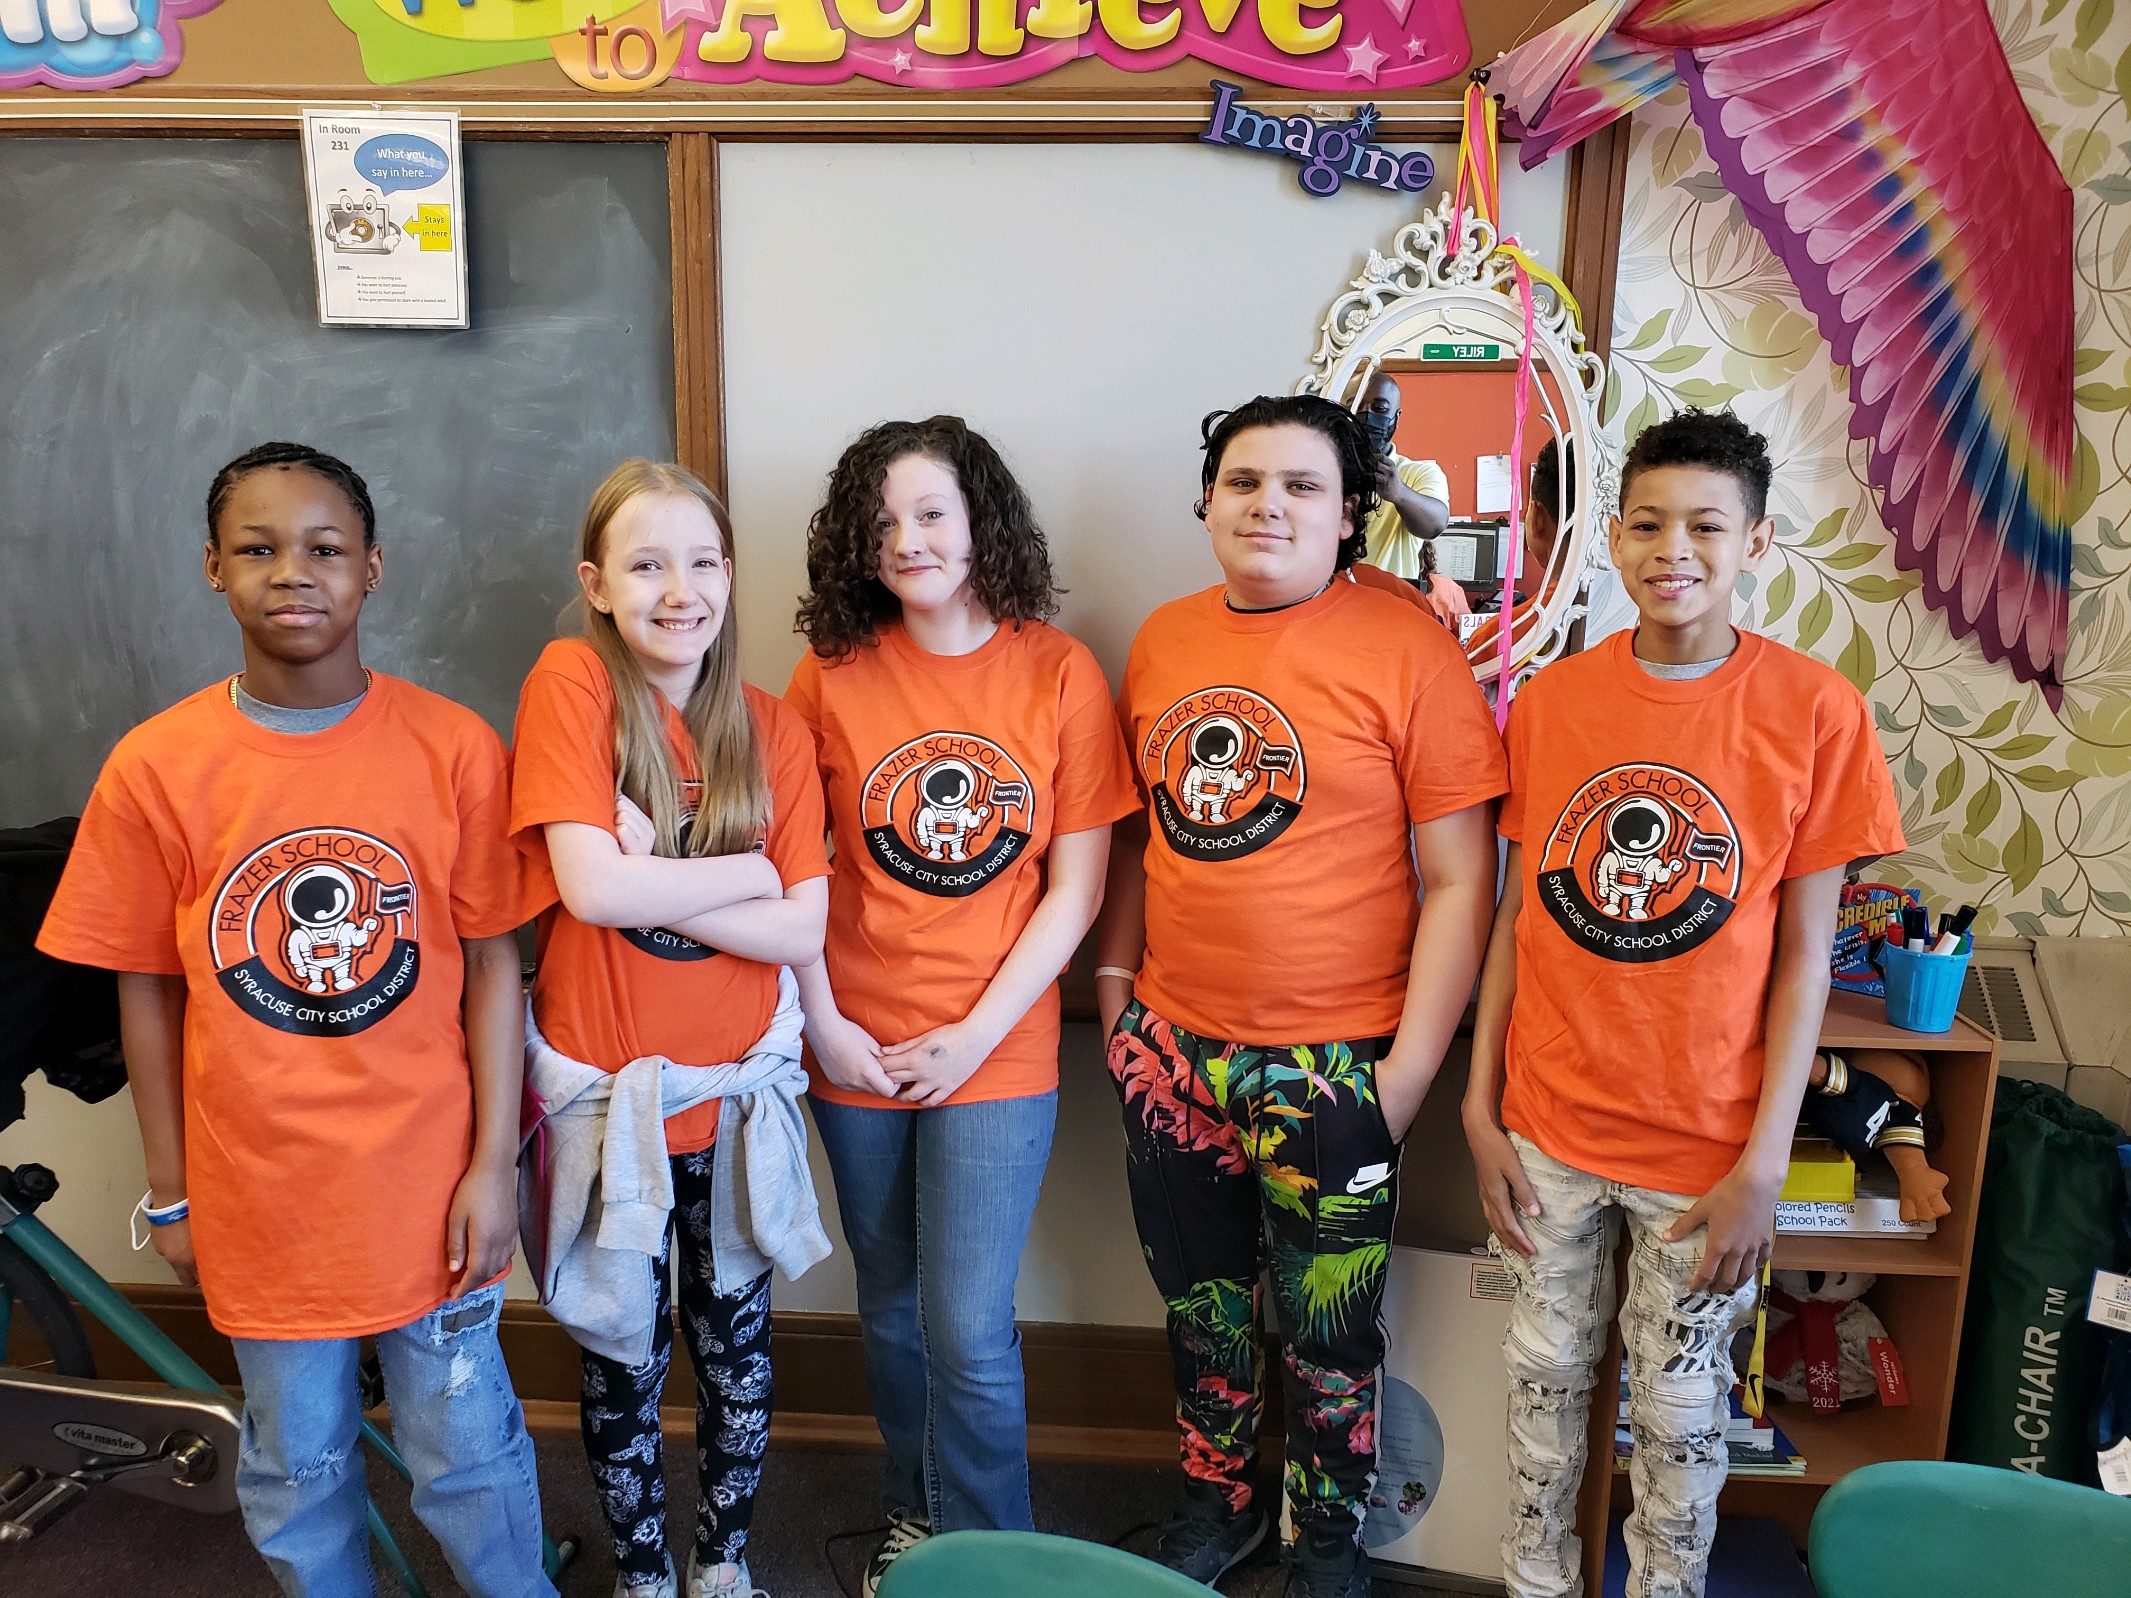 This is a photo of five Frazer students standing in a line in front of a chalkboard, all wearing matching orange Frazer tshirts.